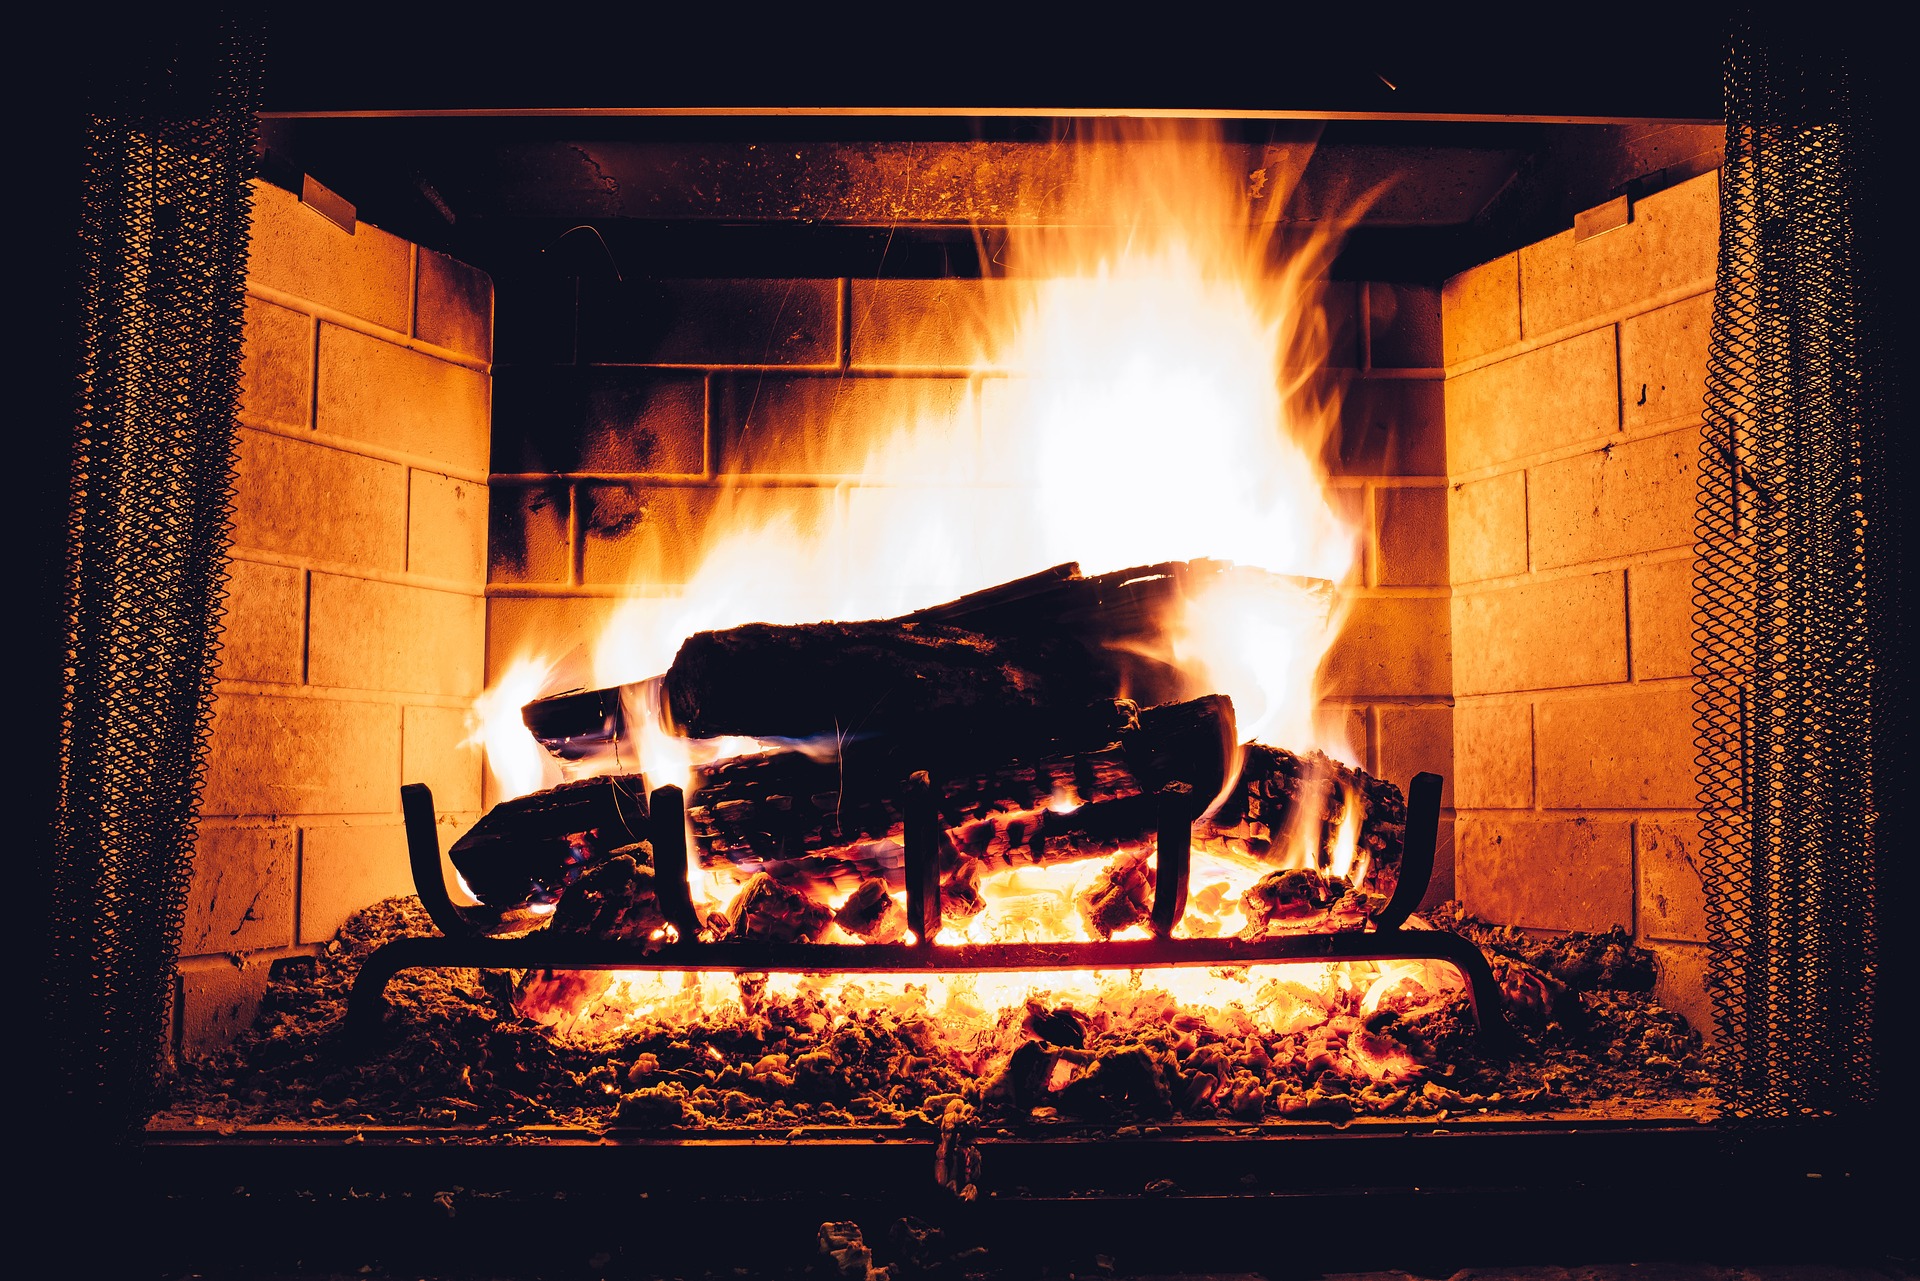 Find a Cosy Pub With a Roaring Fire